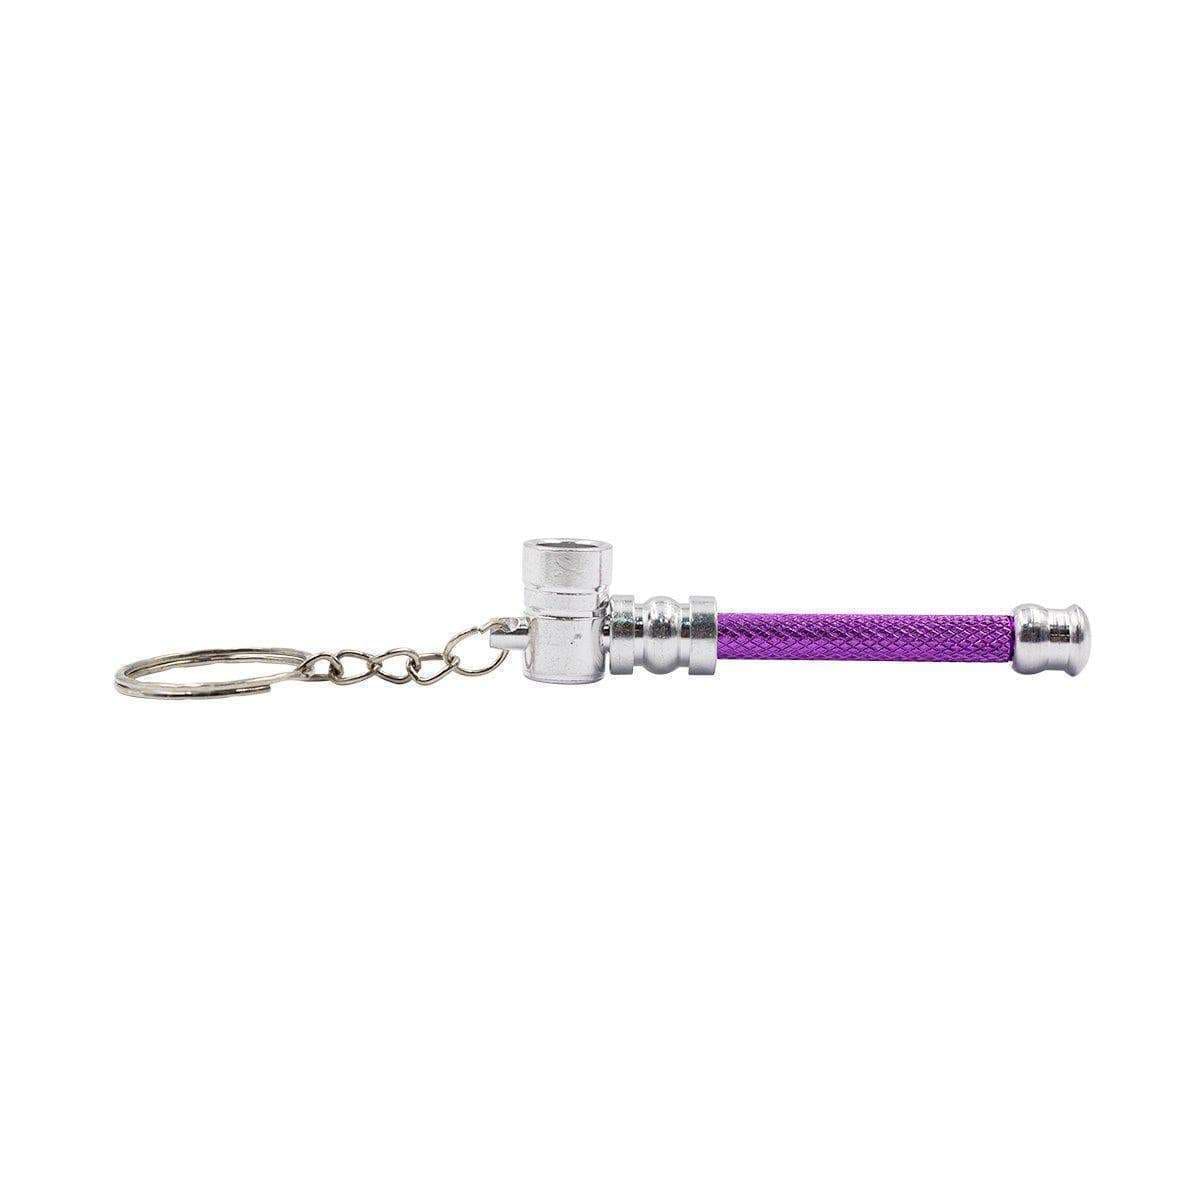 Mini keychain pipe in a cylinder hammer-like shape vibrant Purple stainless steel both ends with keyring